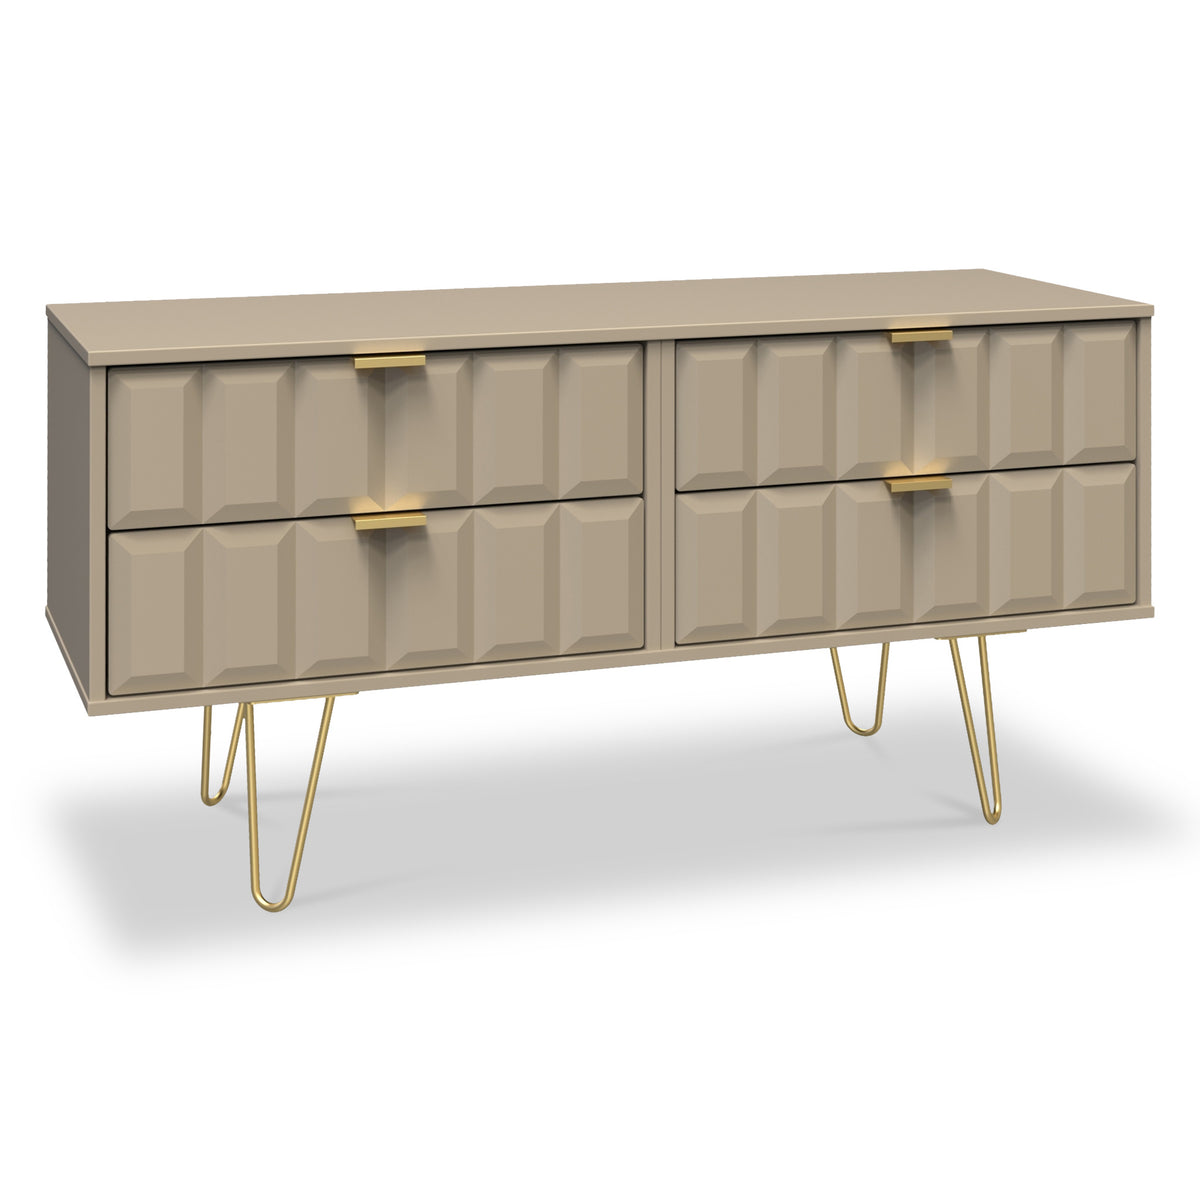 Harlow Taupe 4 Drawer Low TV Unit with Gold Hairpin Legs from Roseland